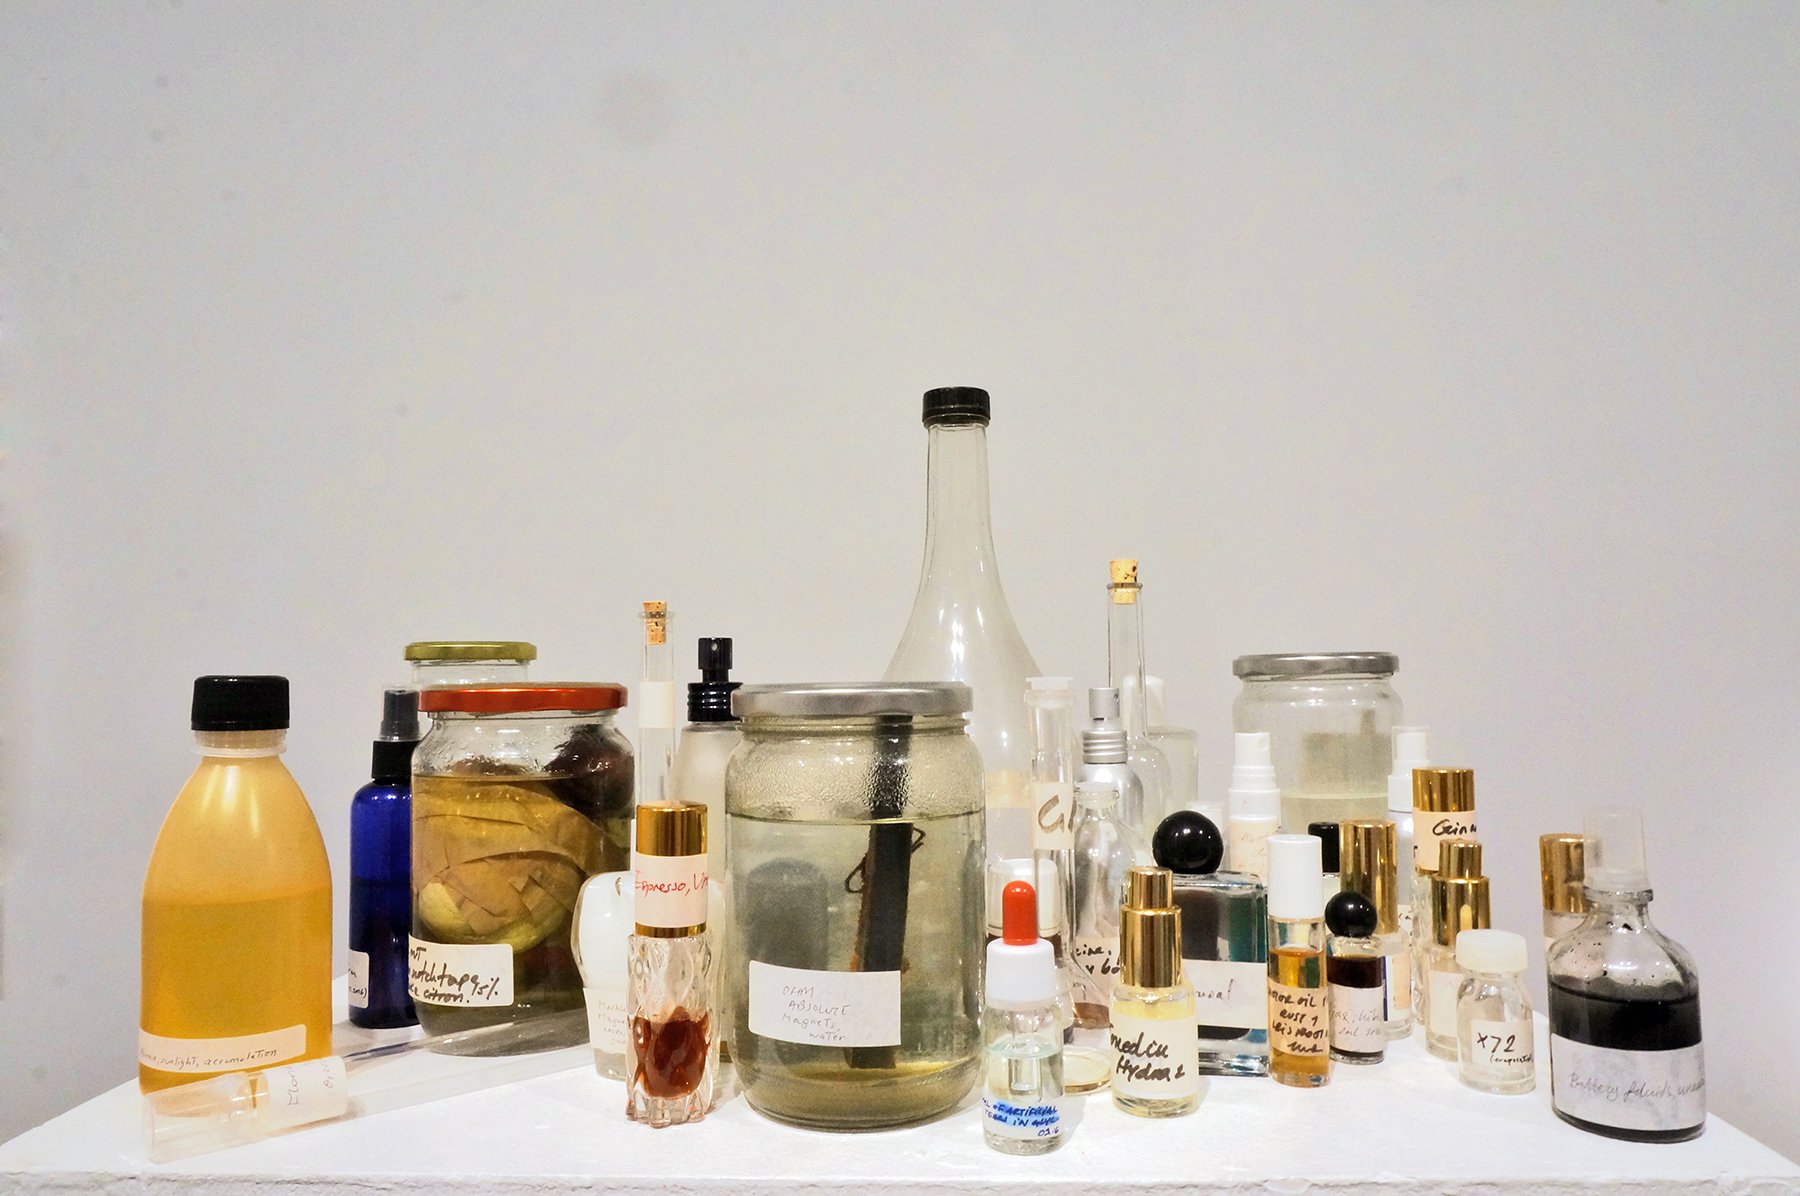 Iris Touliatou, Accords, Archive of airs and waters, glass vials, liquids, extracts, compositions, dimensions variable, ongoing since 2014. Installation view, Tramontane, Ileana Tounta Galllery, Athens, 2016